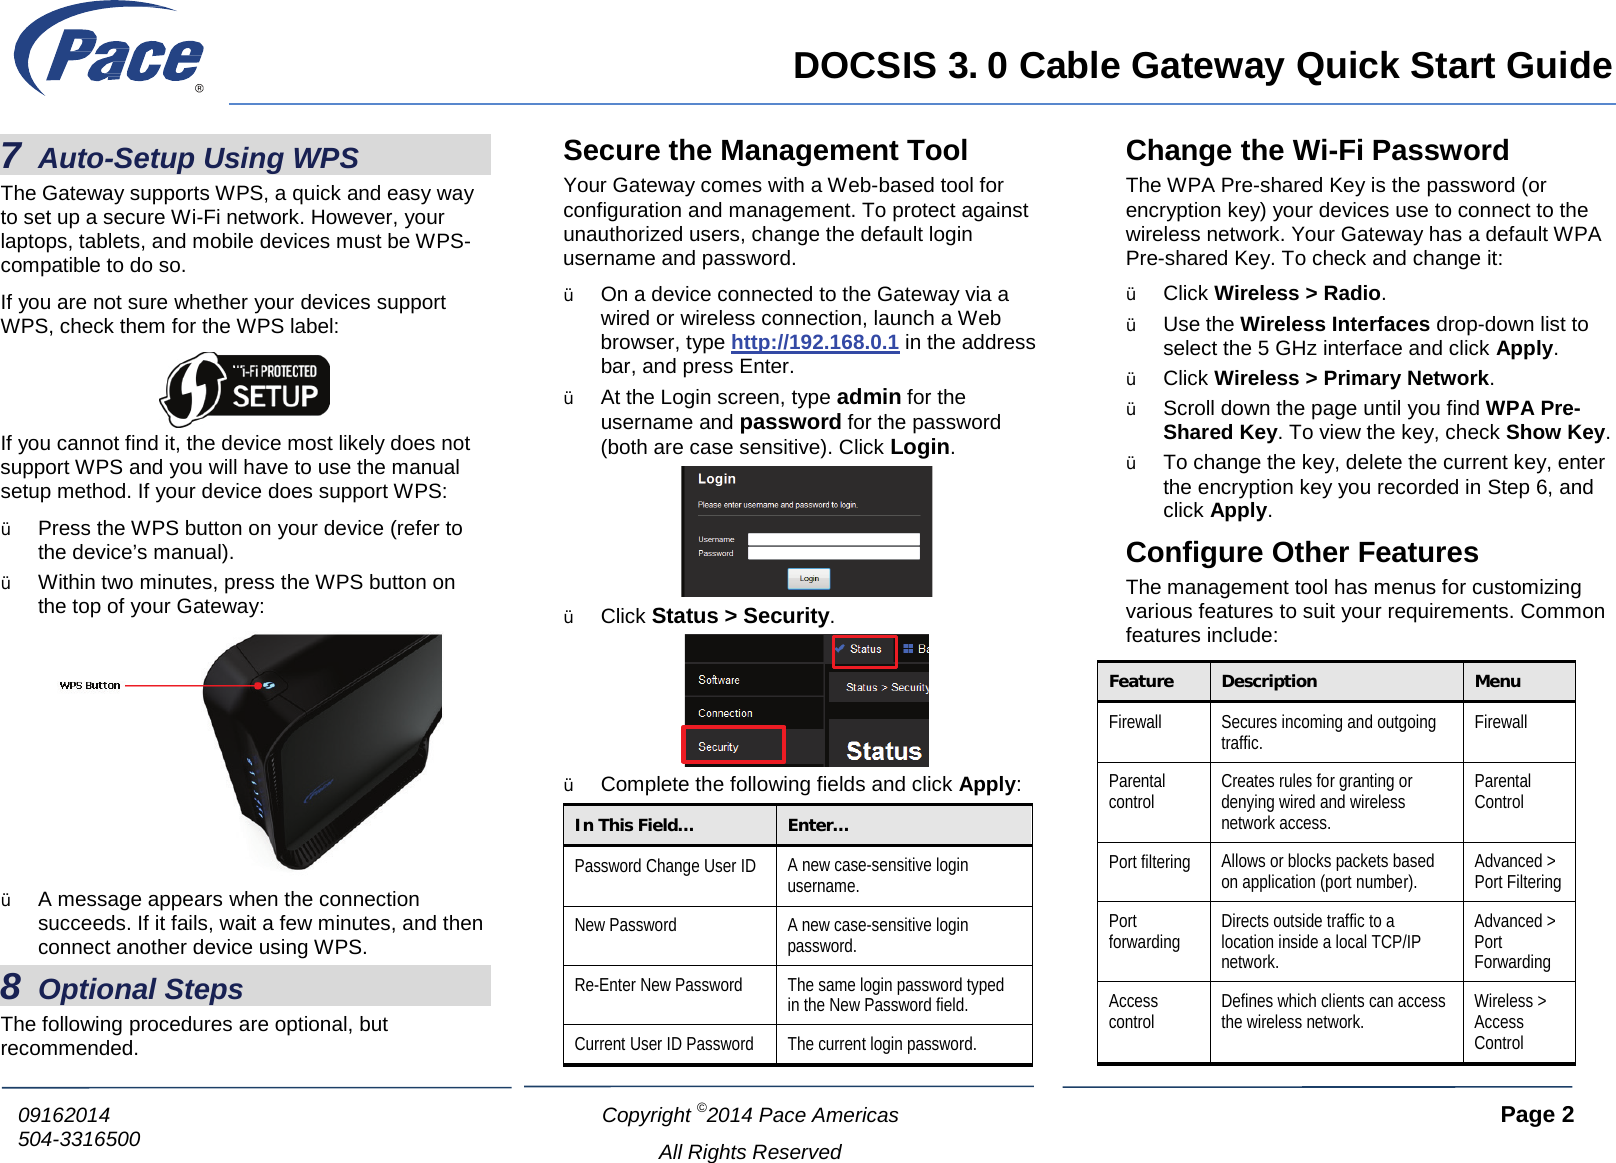     DOCSIS 3. 0 Cable Gateway Quick Start Guide  Copyright ©2014 Pace Americas     Page 2  All Rights Reserved 09162014 504-3316500           7 Auto-Setup Using WPS The Gateway supports WPS, a quick and easy way to set up a secure Wi-Fi network. However, your laptops, tablets, and mobile devices must be WPS-compatible to do so. If you are not sure whether your devices support WPS, check them for the WPS label:  If you cannot find it, the device most likely does not support WPS and you will have to use the manual setup method. If your device does support WPS: Ÿ Press the WPS button on your device (refer to the device’s manual). Ÿ Within two minutes, press the WPS button on the top of your Gateway:  Ÿ A message appears when the connection succeeds. If it fails, wait a few minutes, and then connect another device using WPS. 8 Optional Steps The following procedures are optional, but recommended. Secure the Management Tool Your Gateway comes with a Web-based tool for configuration and management. To protect against unauthorized users, change the default login username and password. Ÿ On a device connected to the Gateway via a wired or wireless connection, launch a Web browser, type http://192.168.0.1 in the address bar, and press Enter. Ÿ At the Login screen, type admin for the username and password for the password (both are case sensitive). Click Login.  Ÿ Click Status &gt; Security.  Ÿ Complete the following fields and click Apply: In This Field…  Enter… Password Change User ID A new case-sensitive login username. New Password A new case-sensitive login password. Re-Enter New Password The same login password typed in the New Password field. Current User ID Password  The current login password. Change the Wi-Fi Password The WPA Pre-shared Key is the password (or encryption key) your devices use to connect to the wireless network. Your Gateway has a default WPA Pre-shared Key. To check and change it: Ÿ Click Wireless &gt; Radio. Ÿ Use the Wireless Interfaces drop-down list to select the 5 GHz interface and click Apply. Ÿ Click Wireless &gt; Primary Network. Ÿ Scroll down the page until you find WPA Pre-Shared Key. To view the key, check Show Key. Ÿ To change the key, delete the current key, enter the encryption key you recorded in Step 6, and click Apply. Configure Other Features The management tool has menus for customizing various features to suit your requirements. Common features include: Feature Description Menu Firewall Secures incoming and outgoing traffic. Firewall Parental control Creates rules for granting or denying wired and wireless network access. Parental Control Port filtering Allows or blocks packets based on application (port number). Advanced &gt; Port Filtering Port forwarding Directs outside traffic to a location inside a local TCP/IP network. Advanced &gt; Port Forwarding Access control Defines which clients can access the wireless network. Wireless &gt; Access Control  